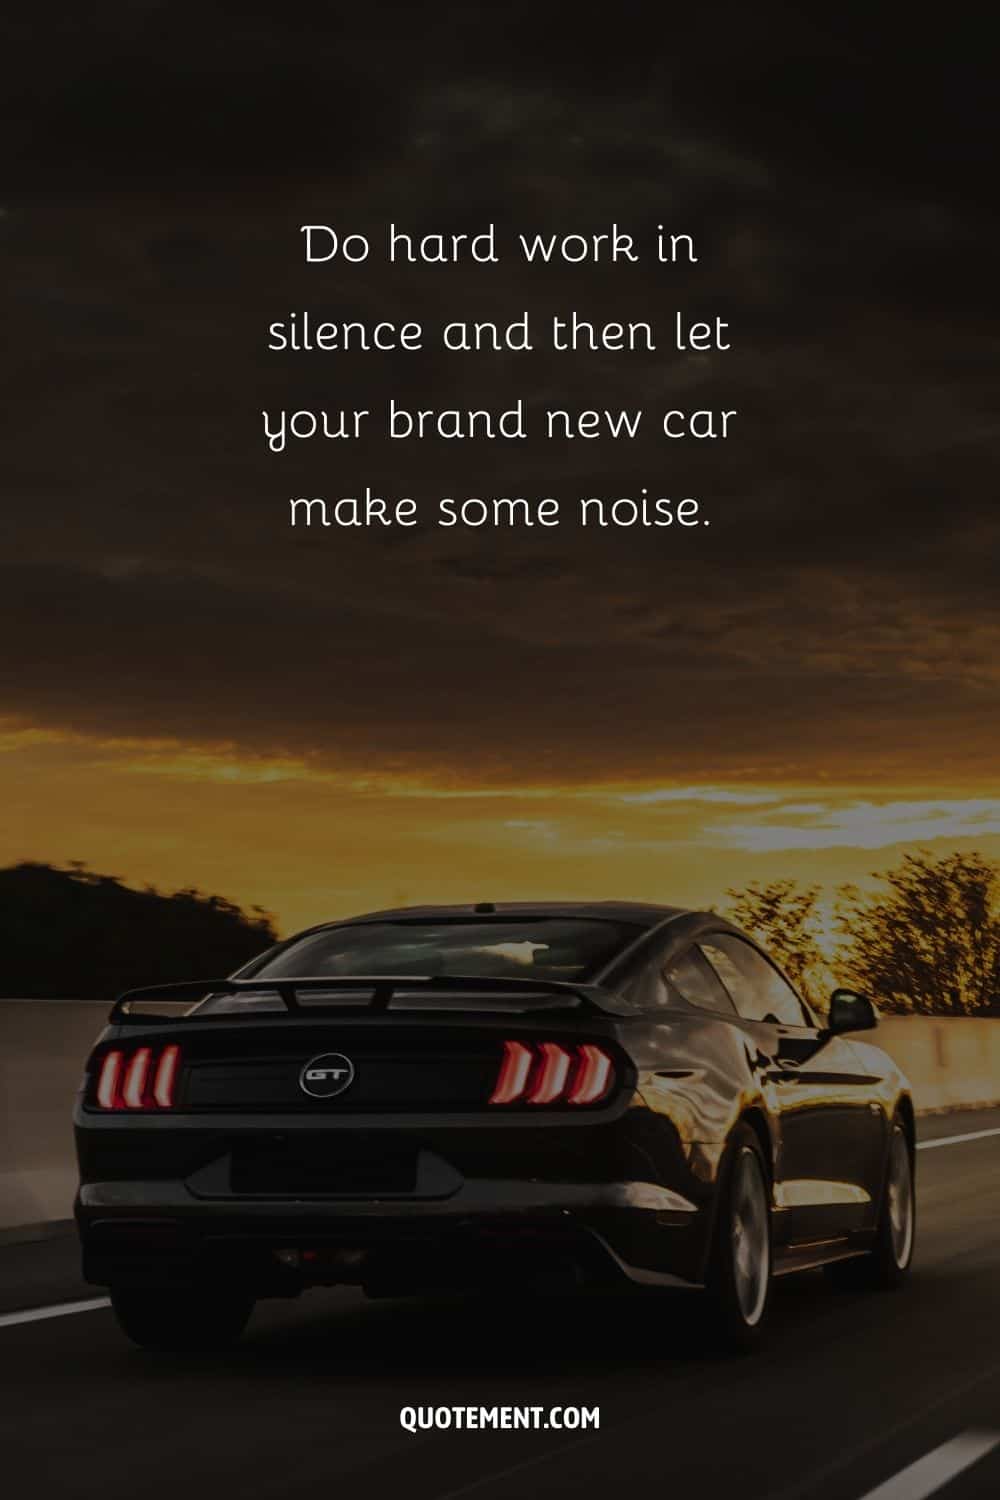 “Do hard work in silence and then let your brand new car make some noise.”